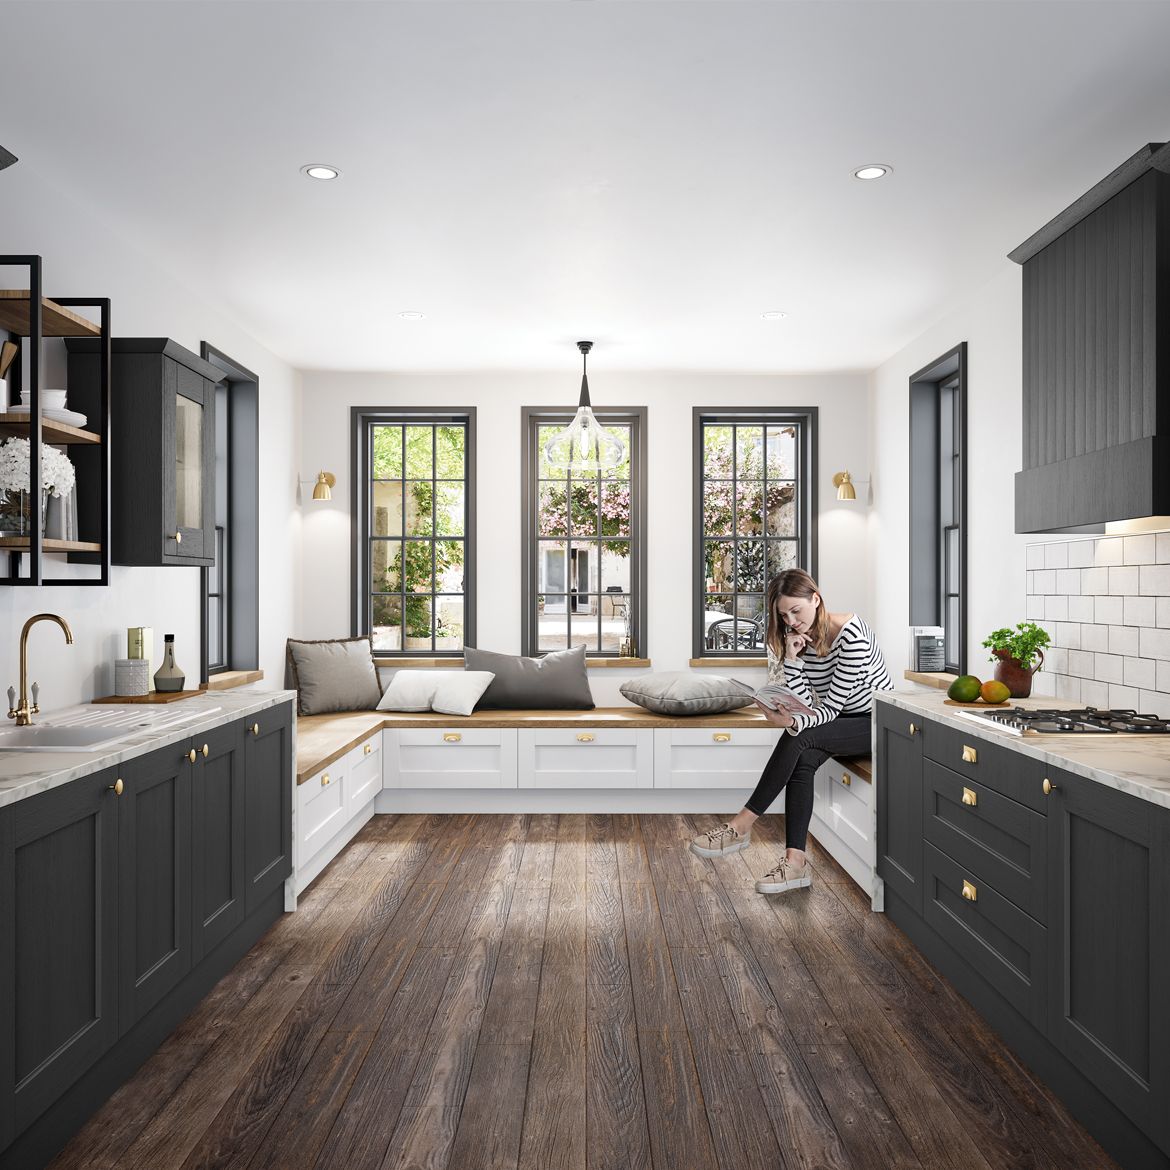 Planning A Kitchen: Your Complete Guide On How to Do It